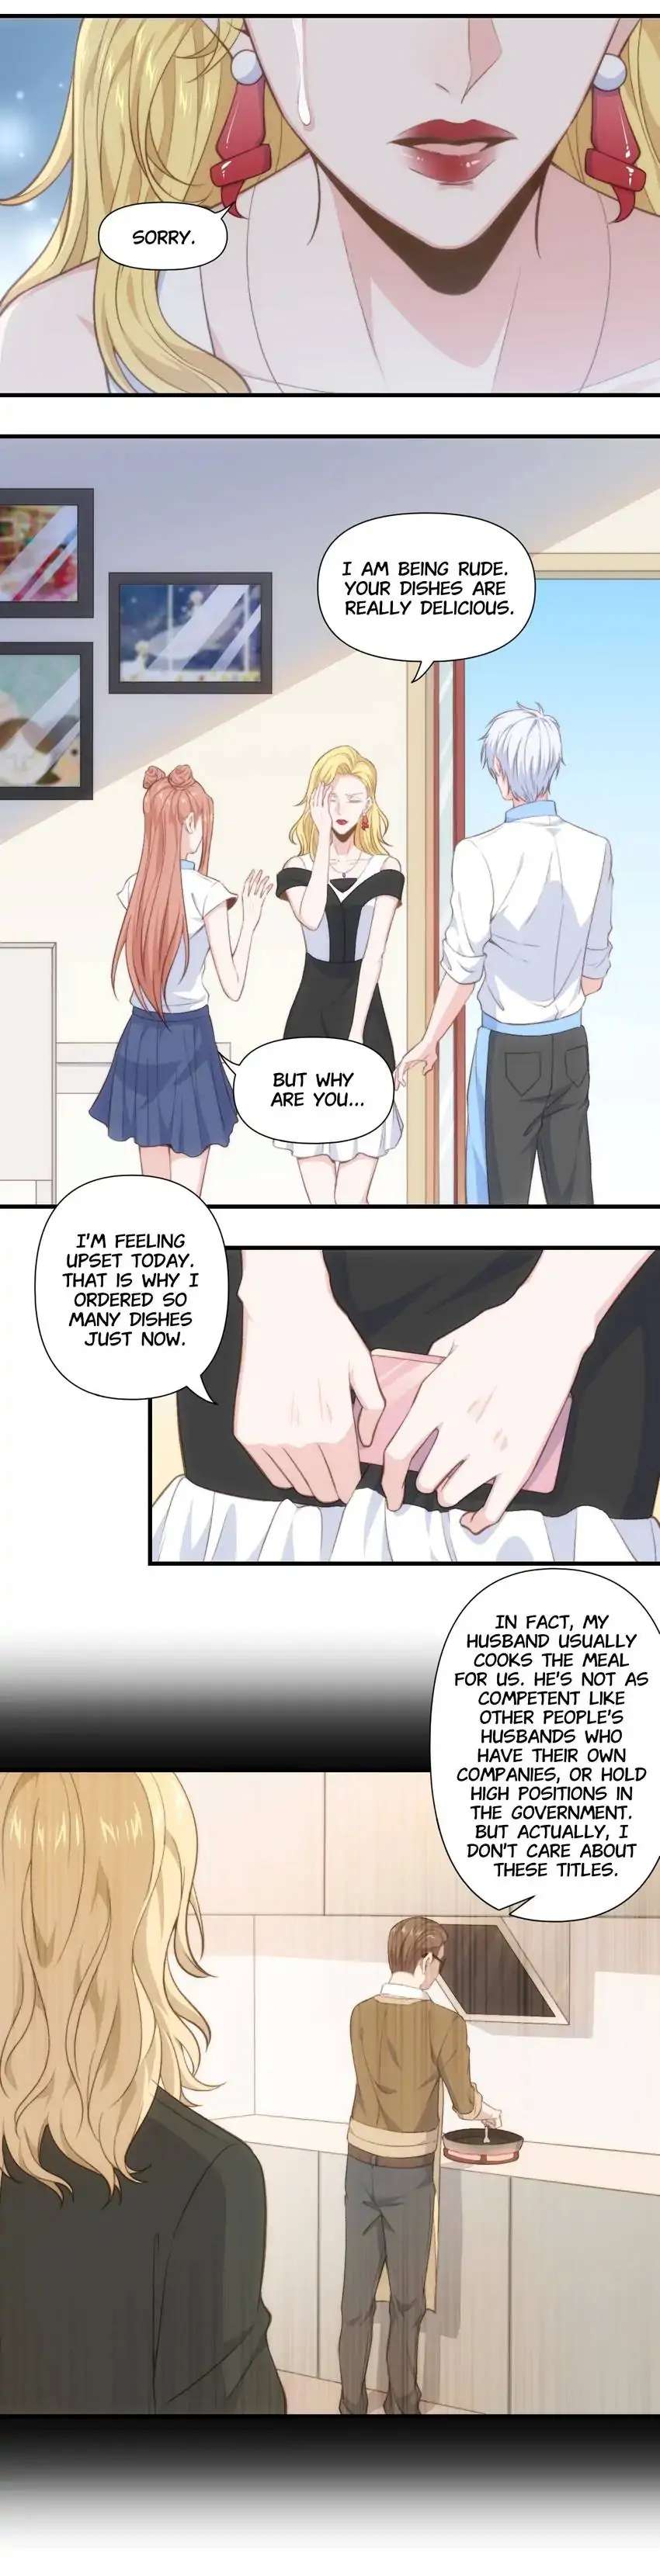 First Love Cafe - Page 1